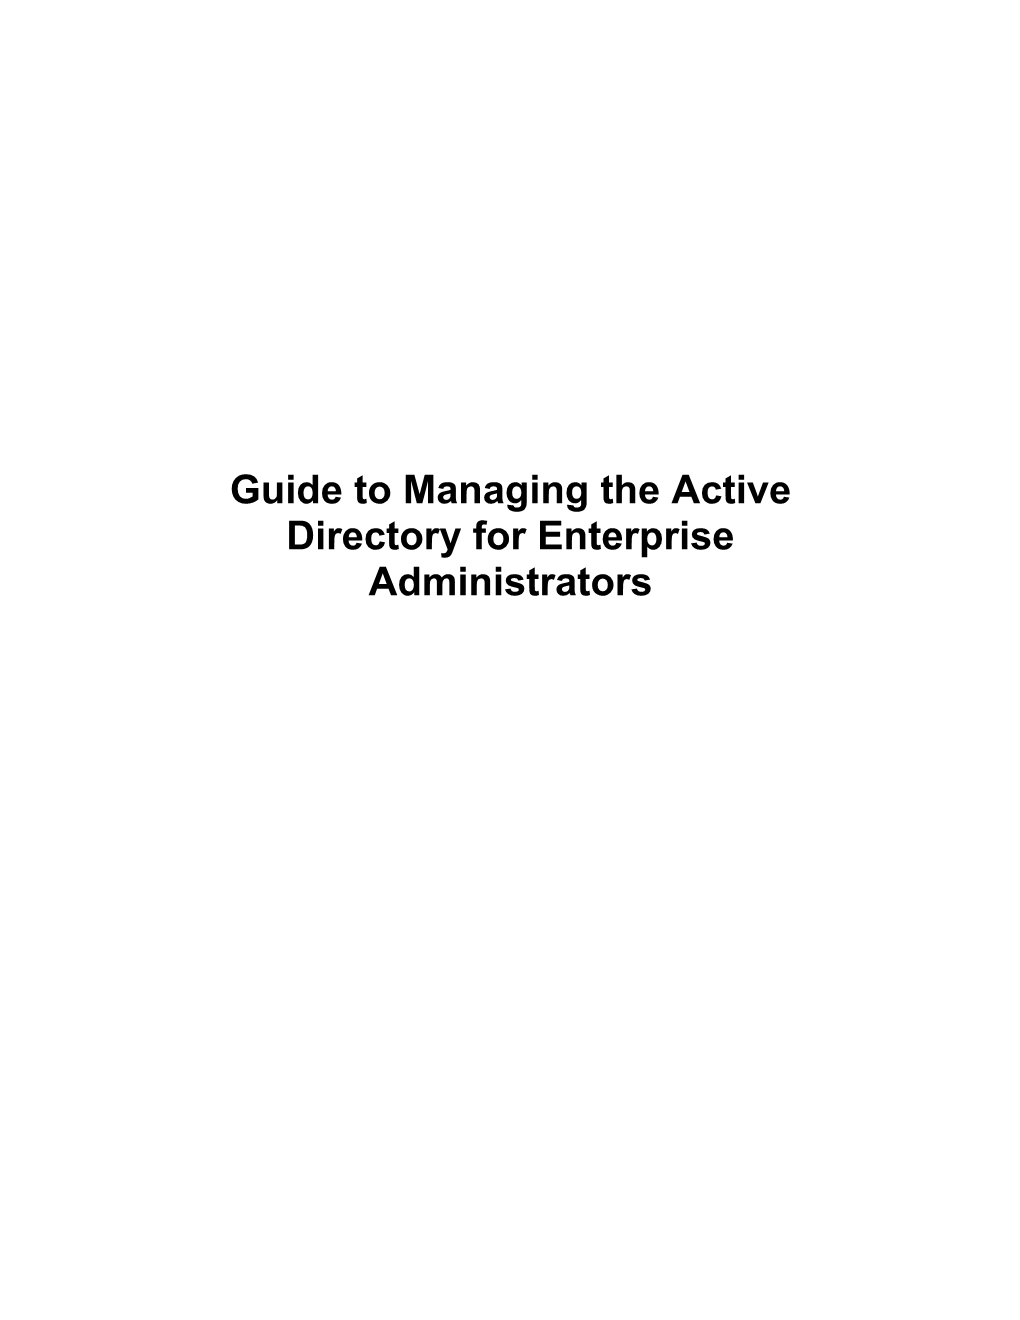 Step-By-Step Guide to Managing the Active Directory for Enterprise Administrators